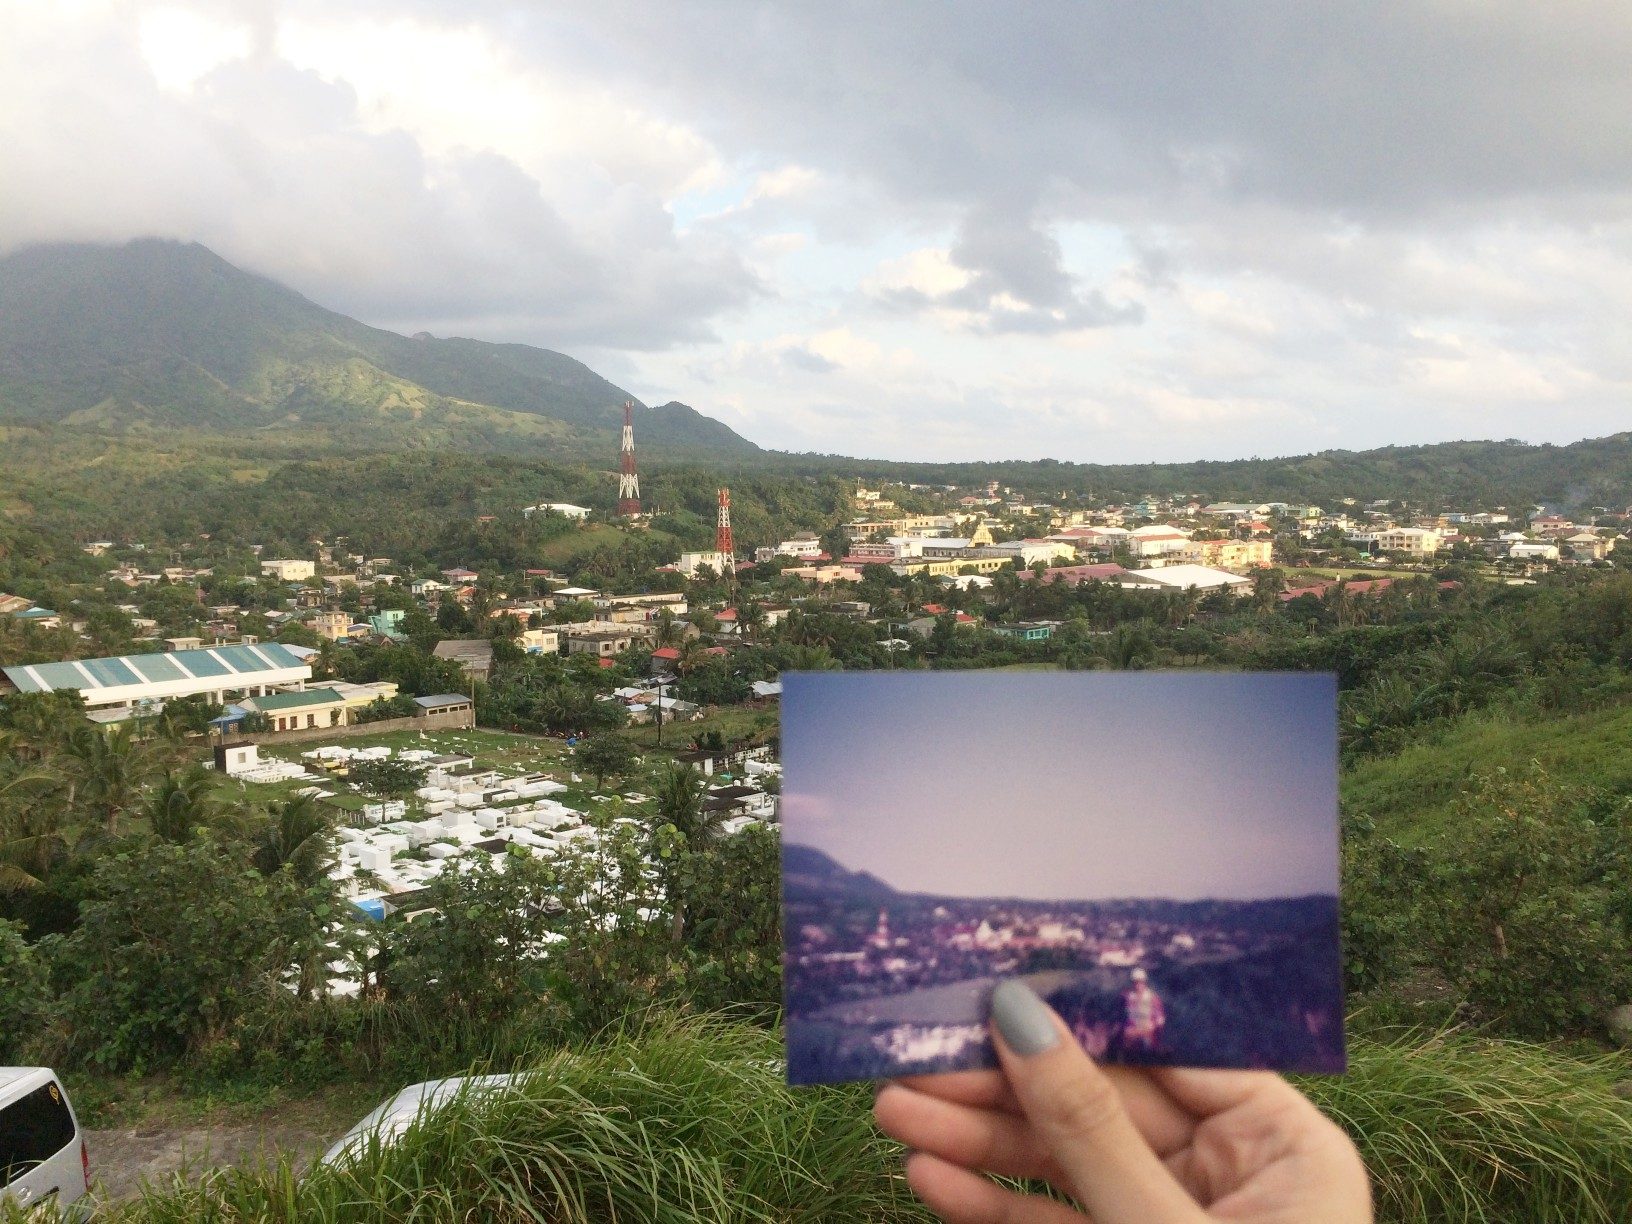 View of Basco town from Naidi Lighthouse area. Photo by Irene Maligat 